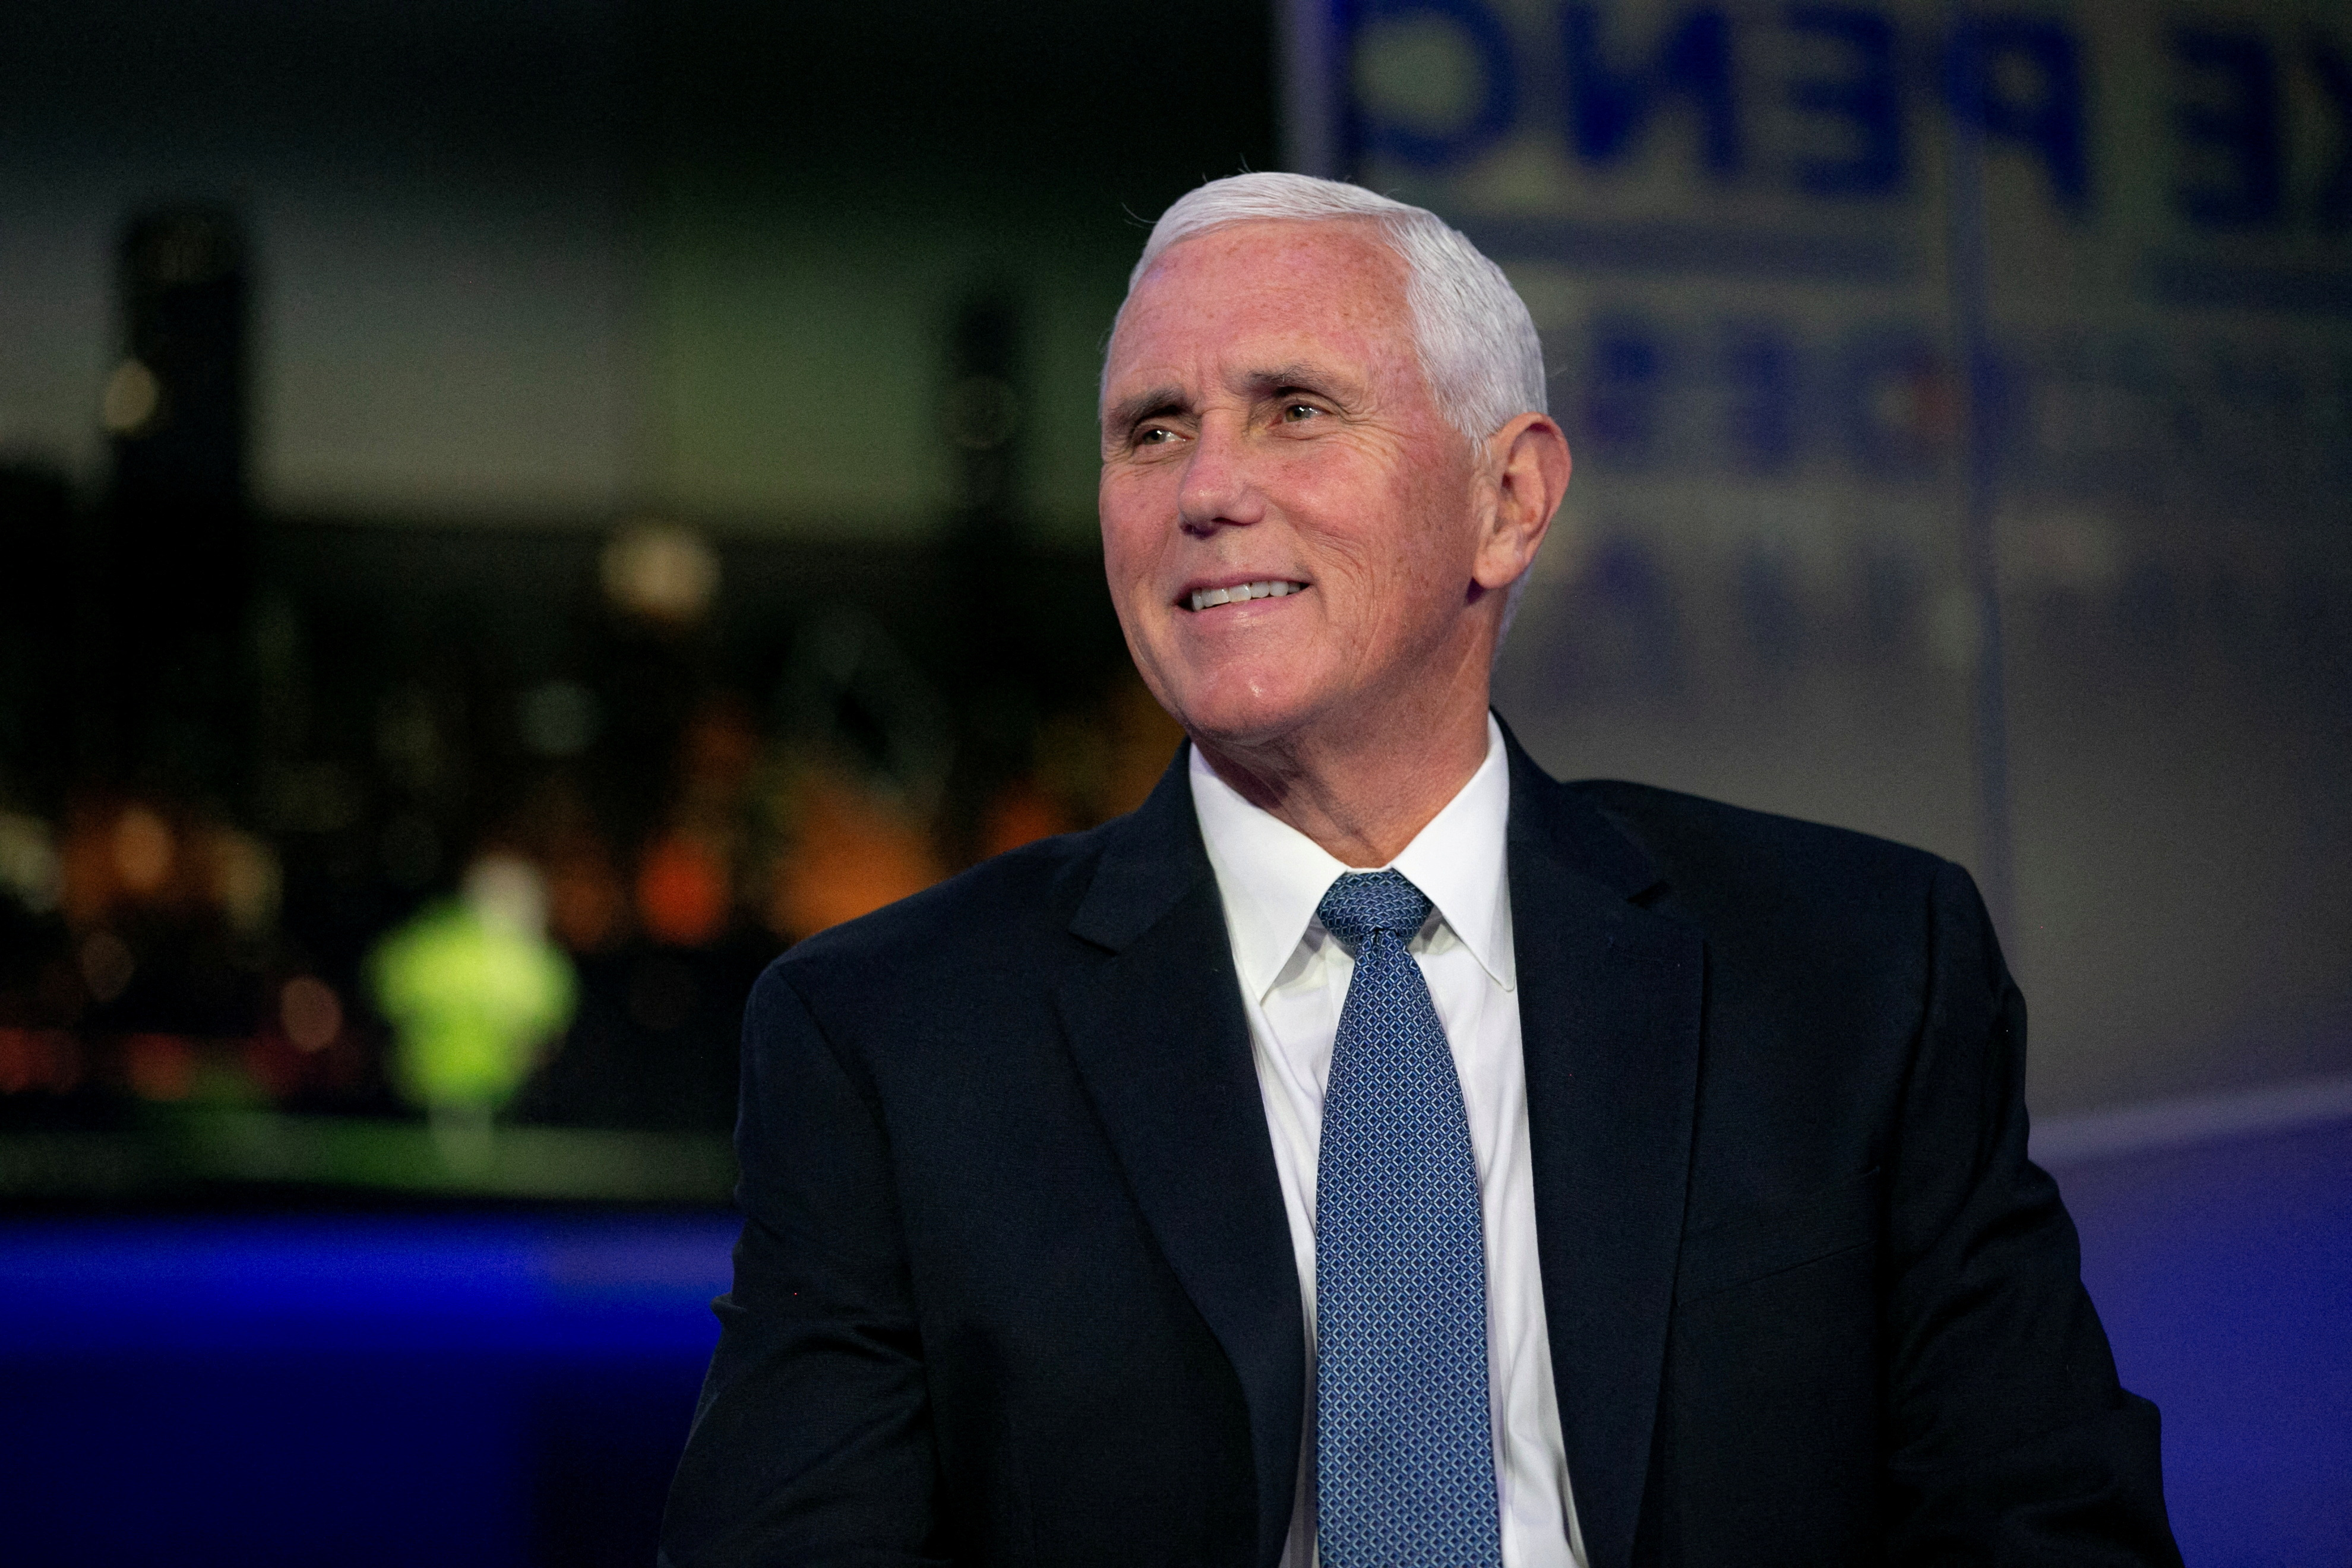 Republican presidential candidate Mike Pence participates in a town hall event in Chicago